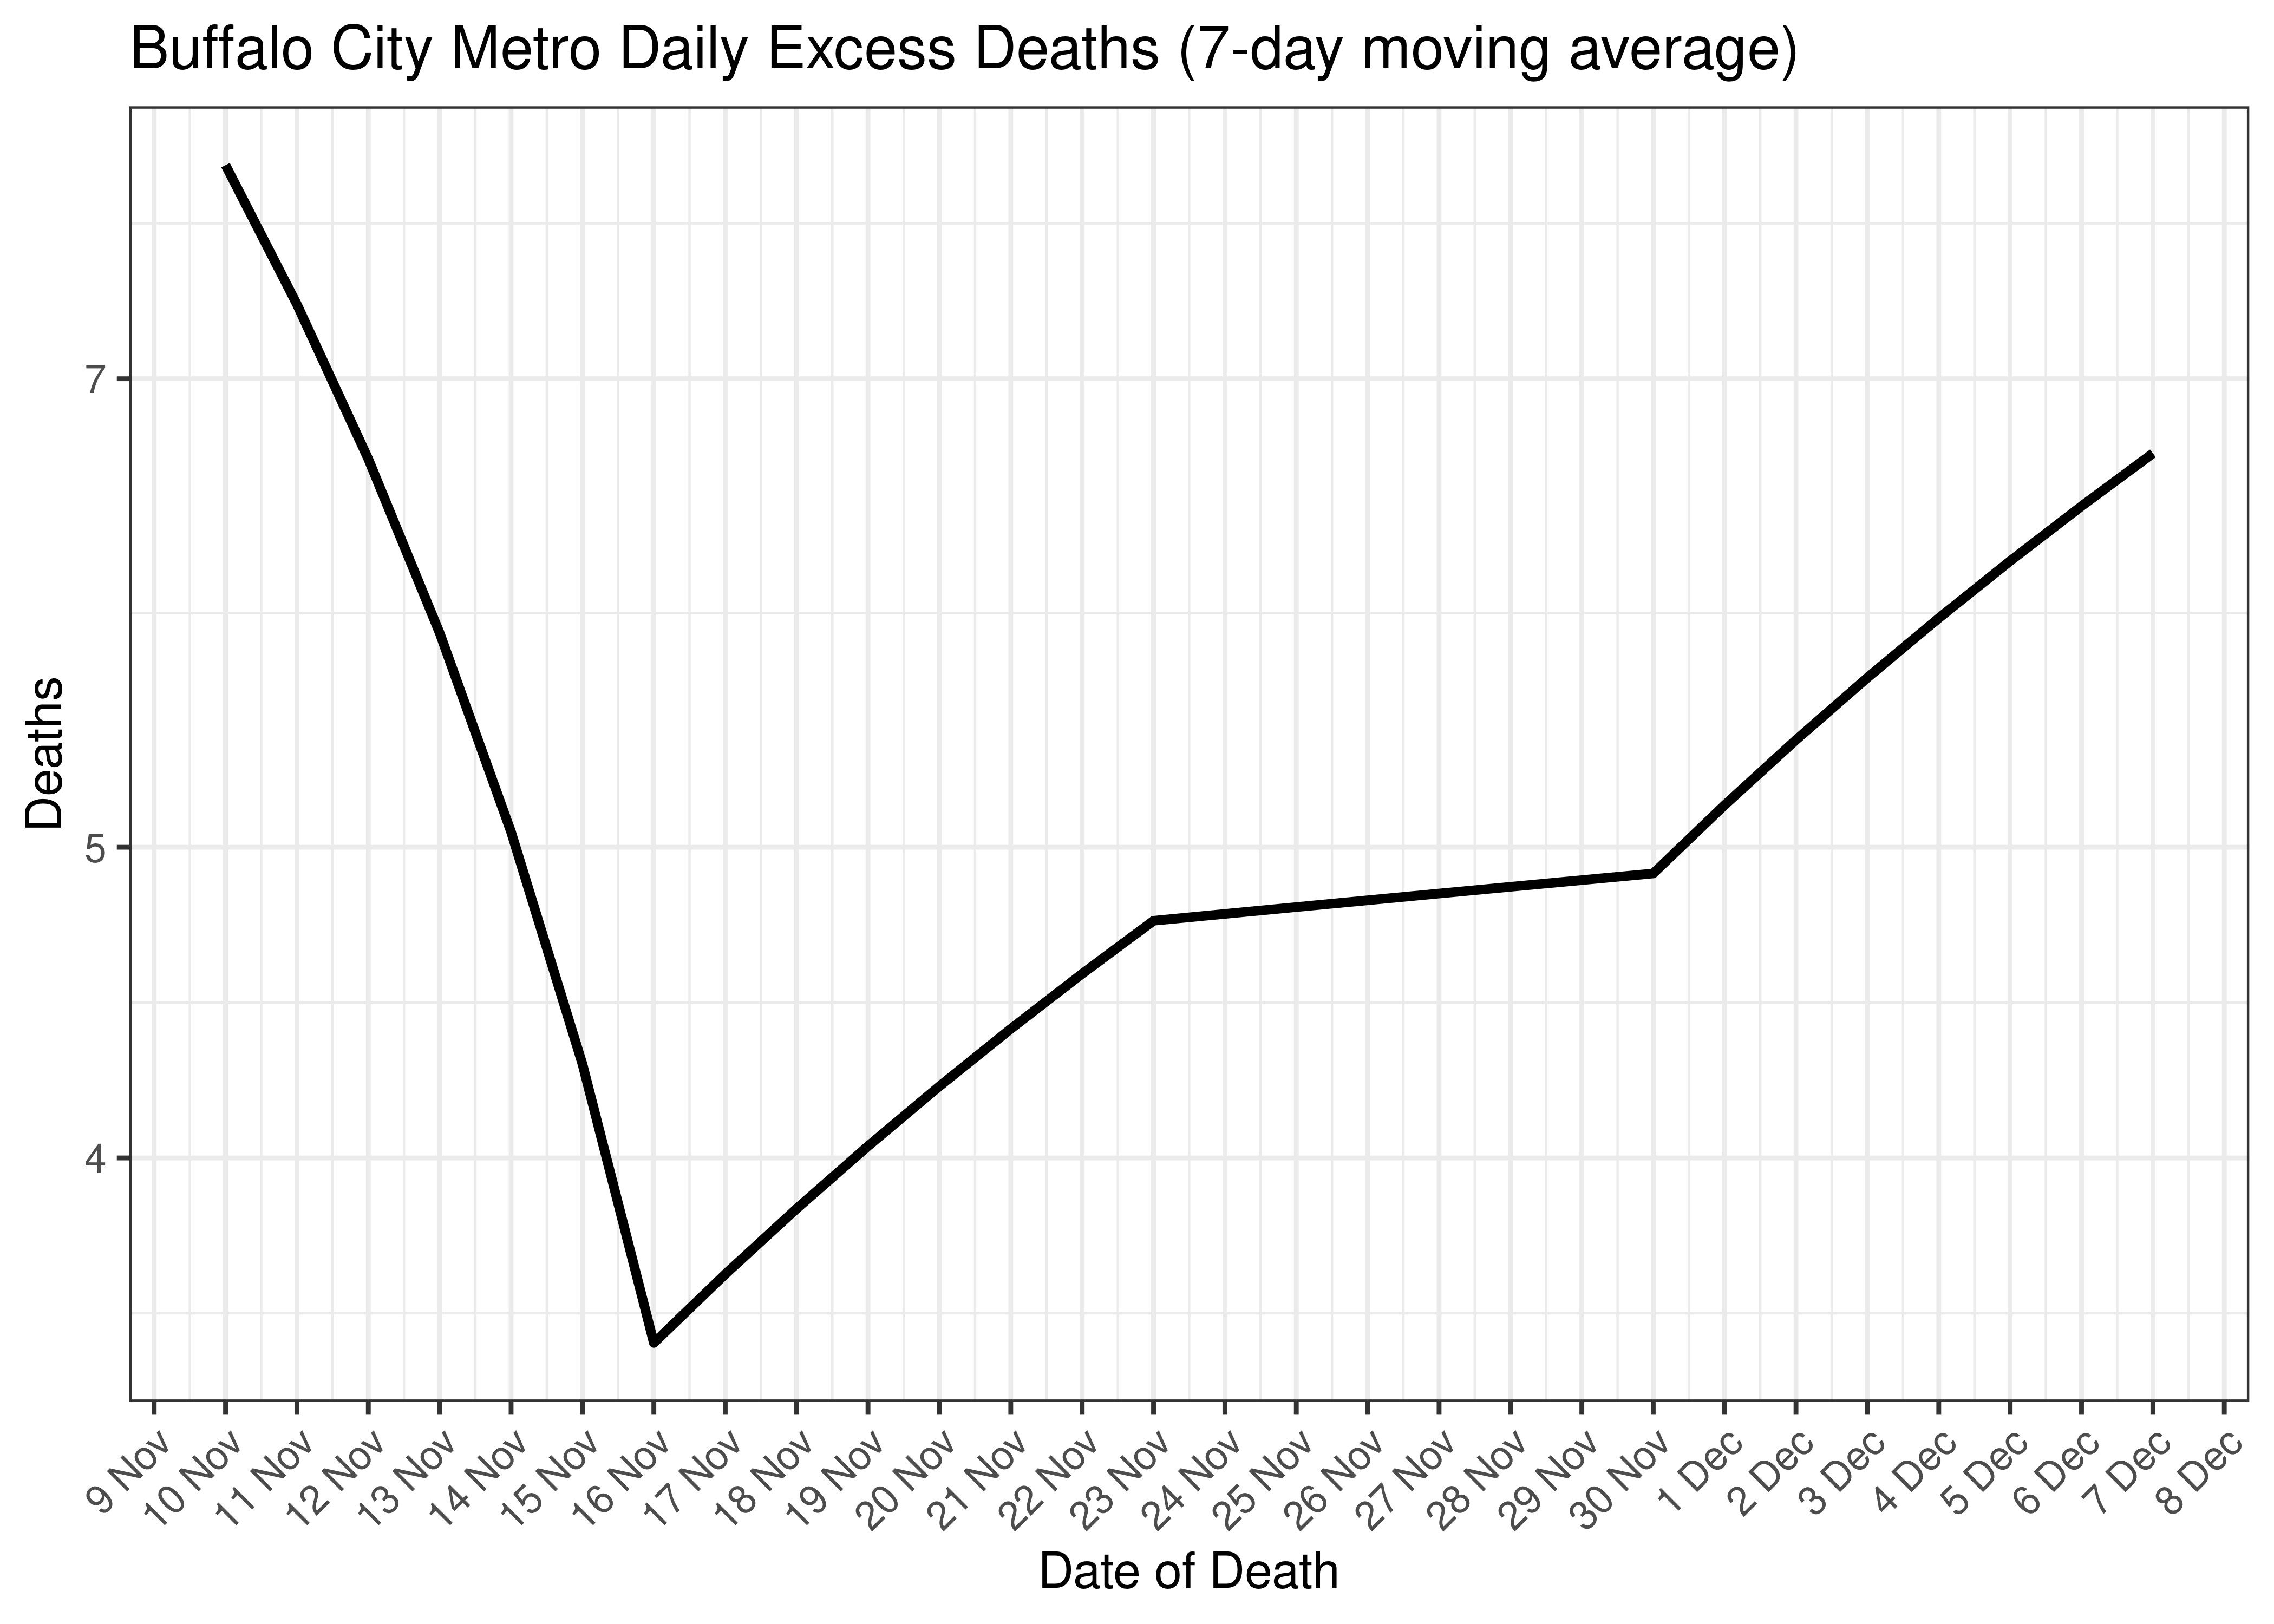 Buffalo City Metro Excess Deaths for Last 30-days (7-day moving average)